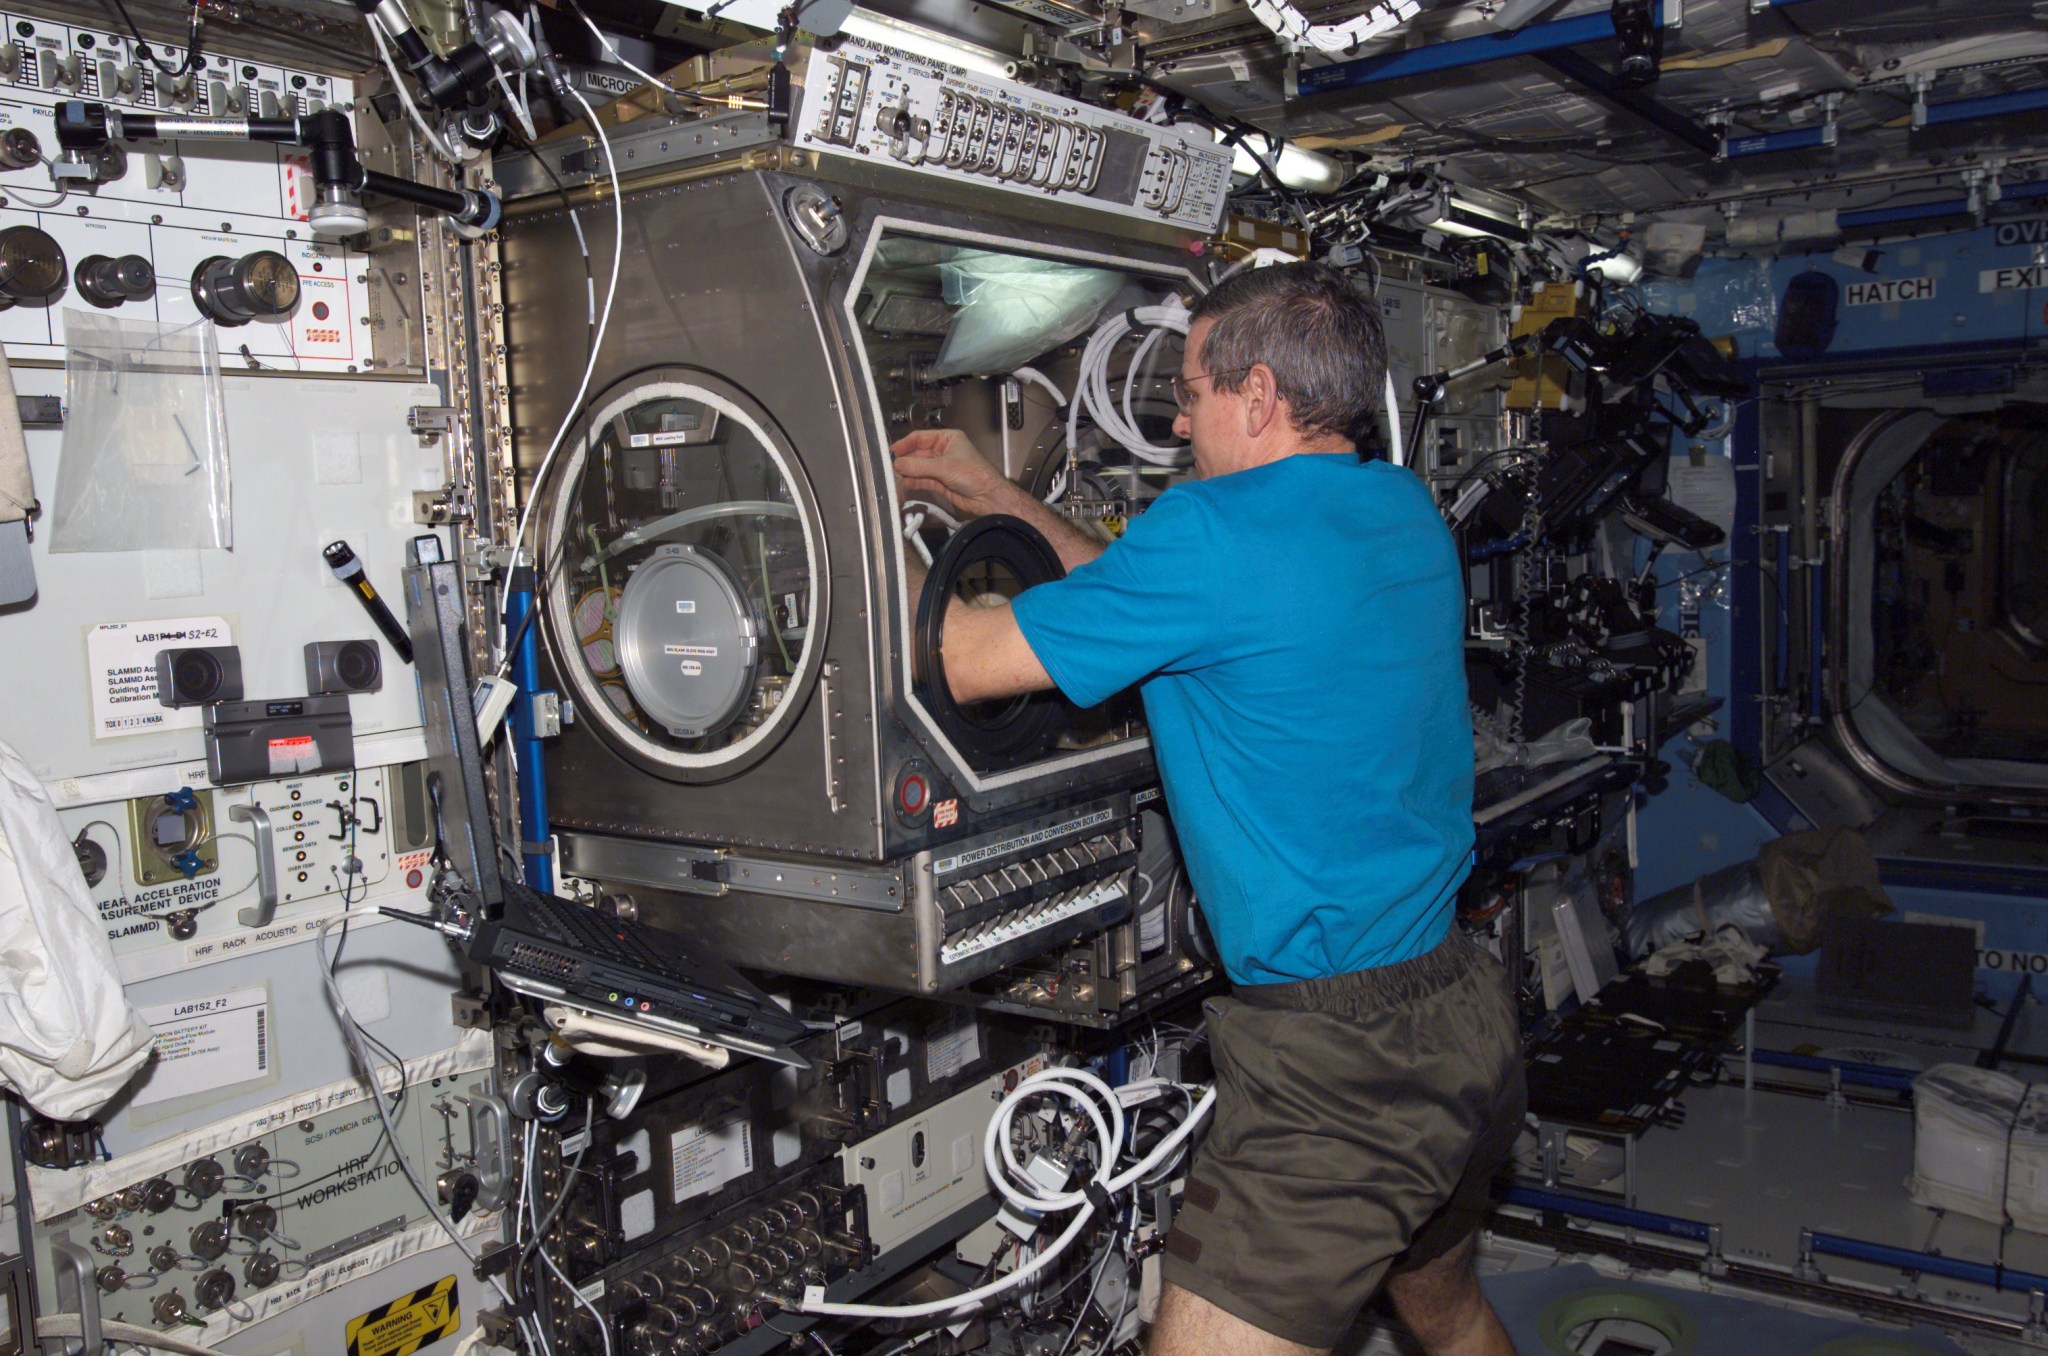 Wearing a short-sleeved shirt and shorts, an astronaut puts his hand in a glovebox